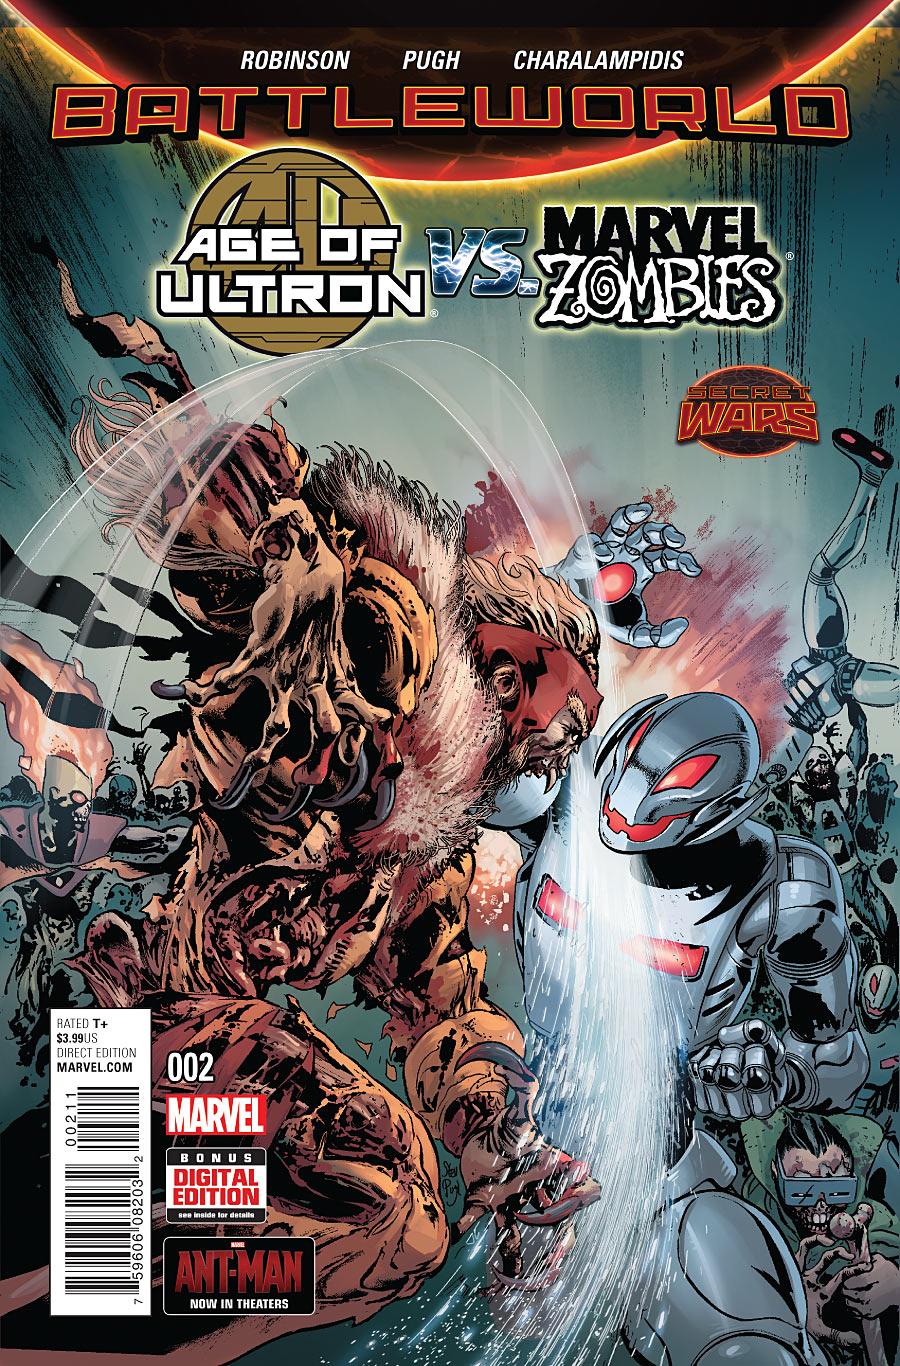 Age of Ultron vs. Marvel Zombies Vol. 1 #2